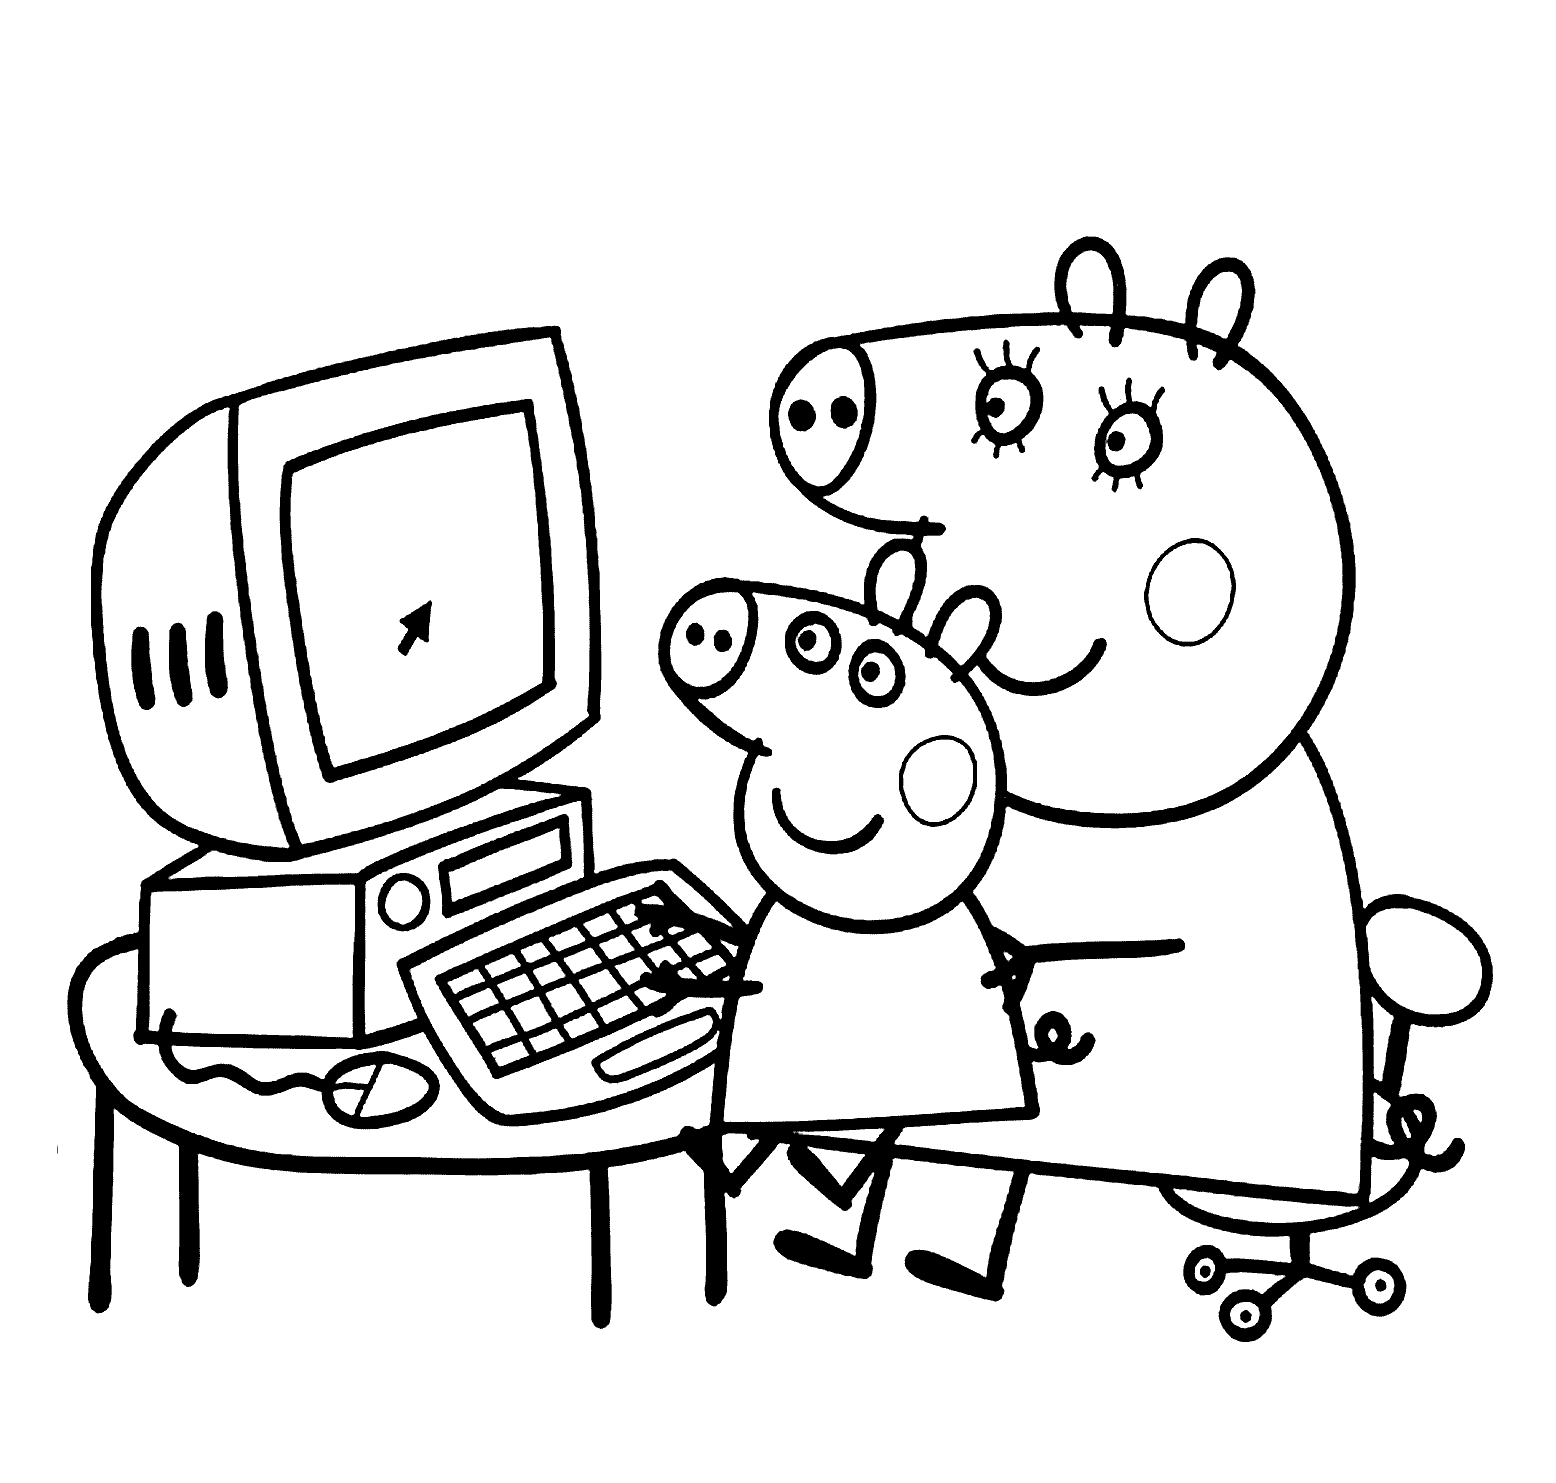 Games Coloring Pages - Bestofcoloring.com